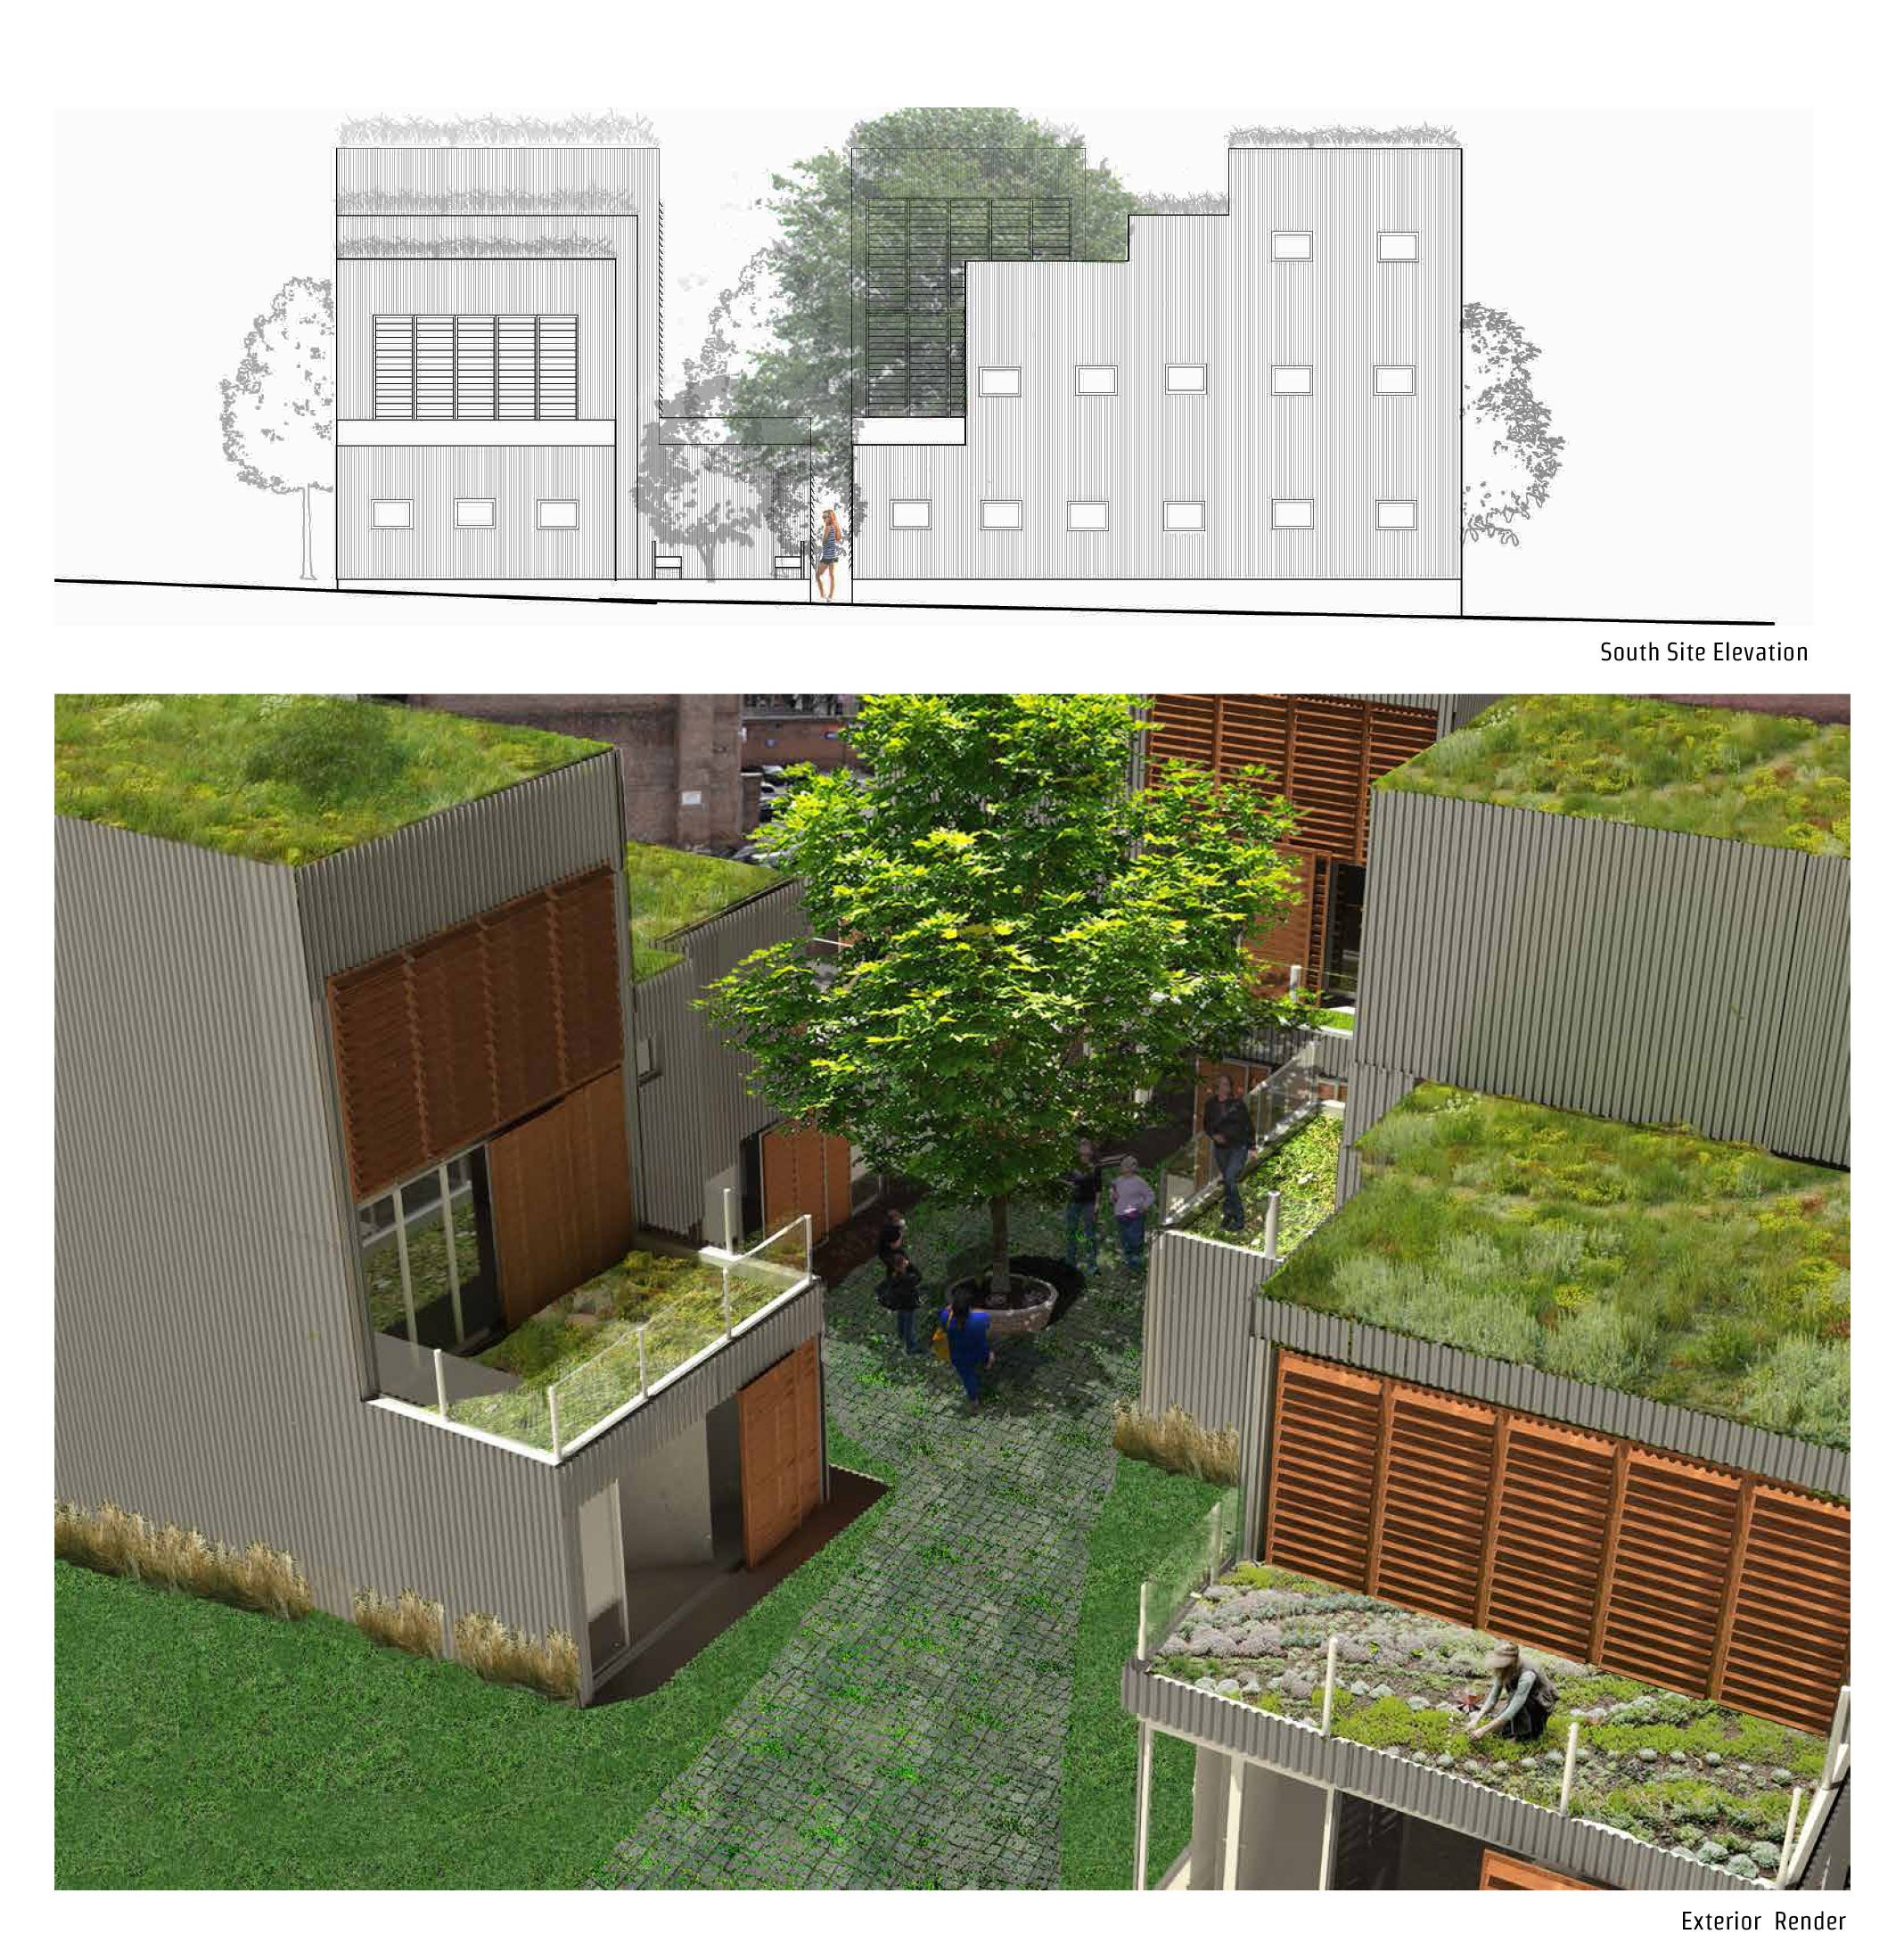 A presentation panel showcasing an elevation drawing of the building, and a rendered view of the exterior courtyard.